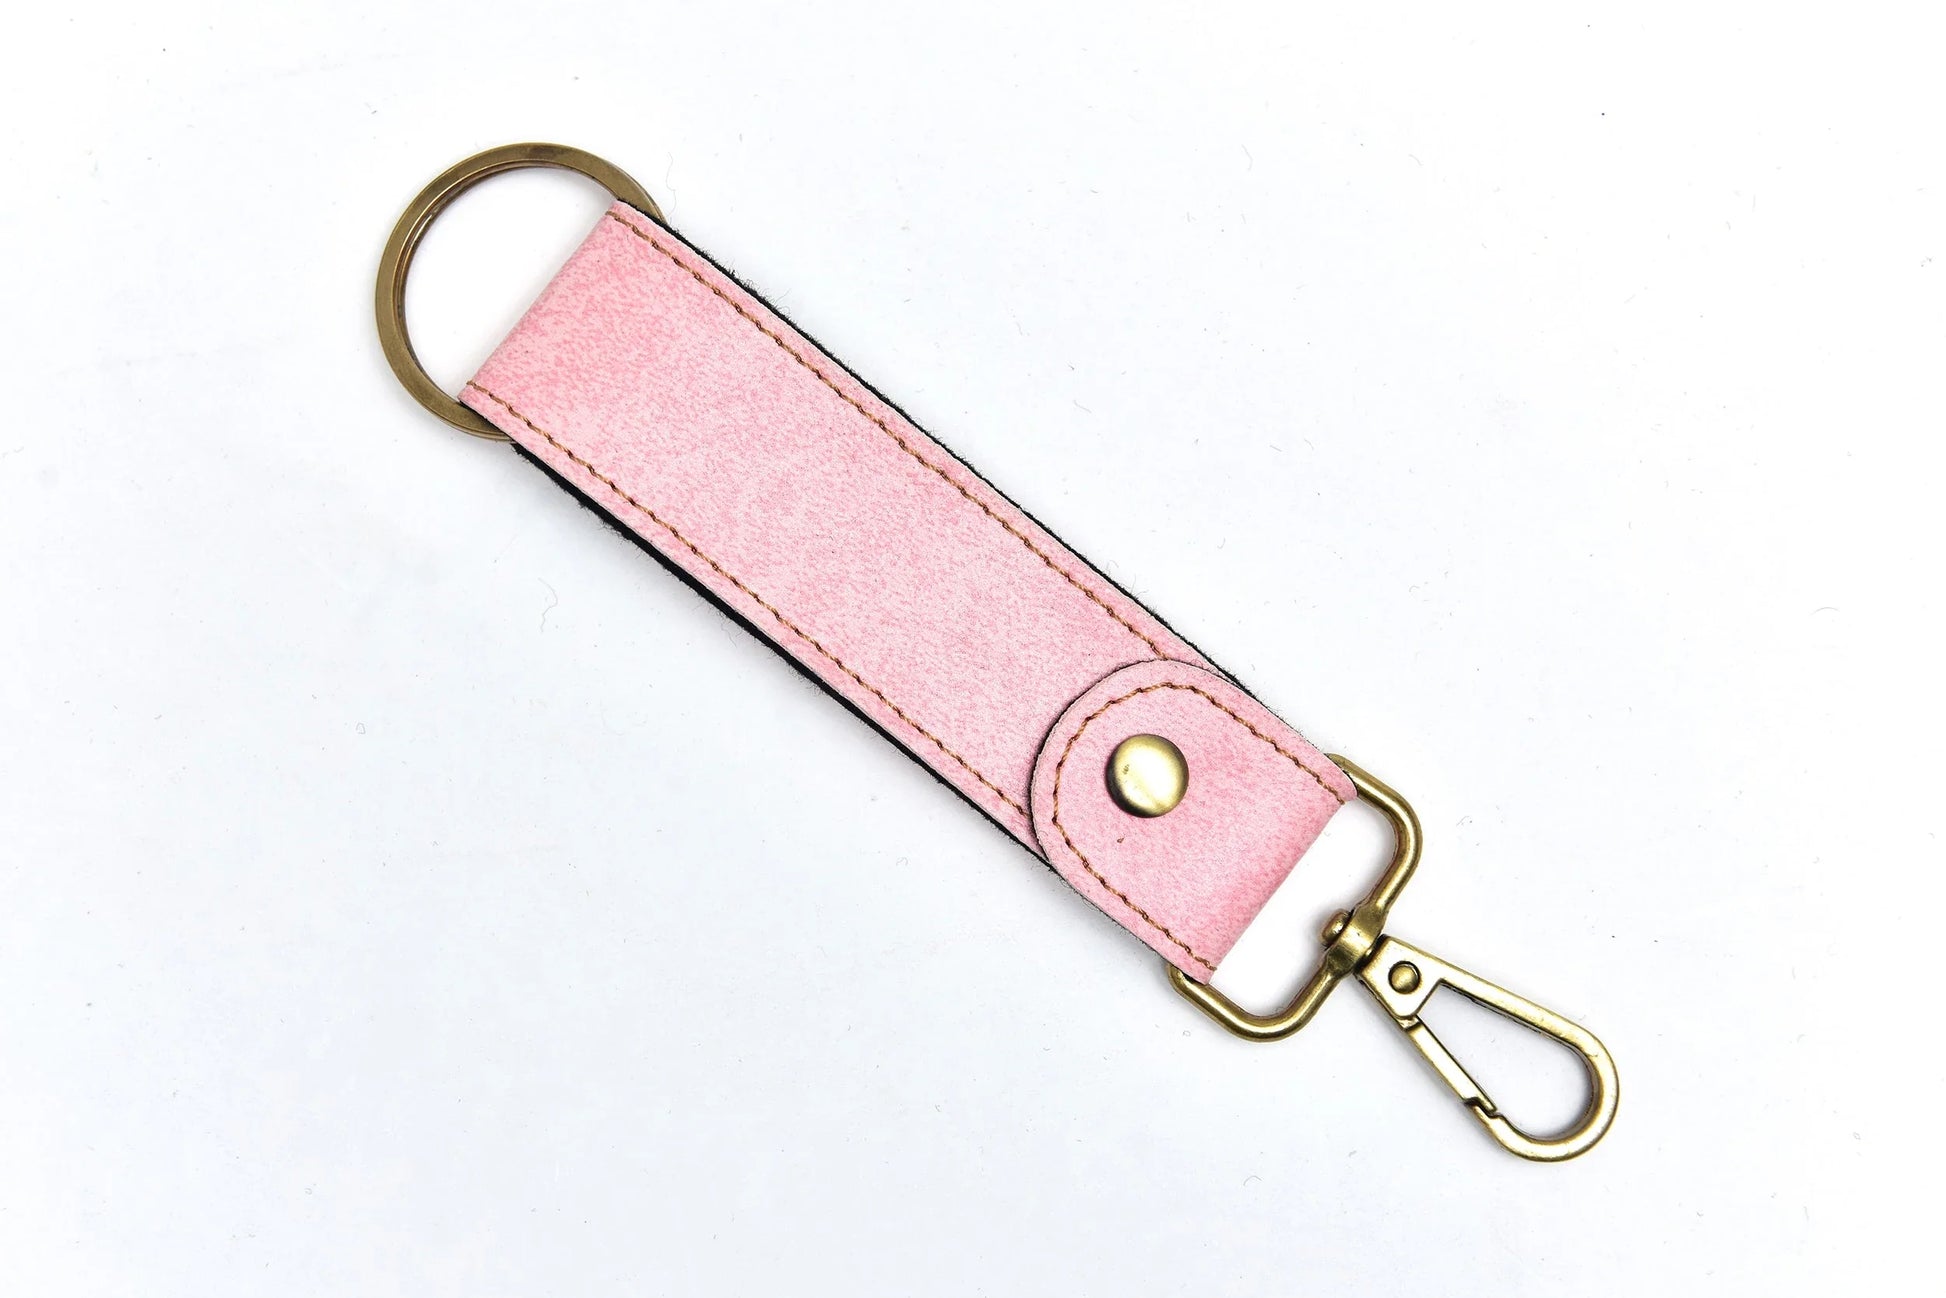 The sleek, modern design of this metal keychain adds a touch of sophistication to your everyday carry.